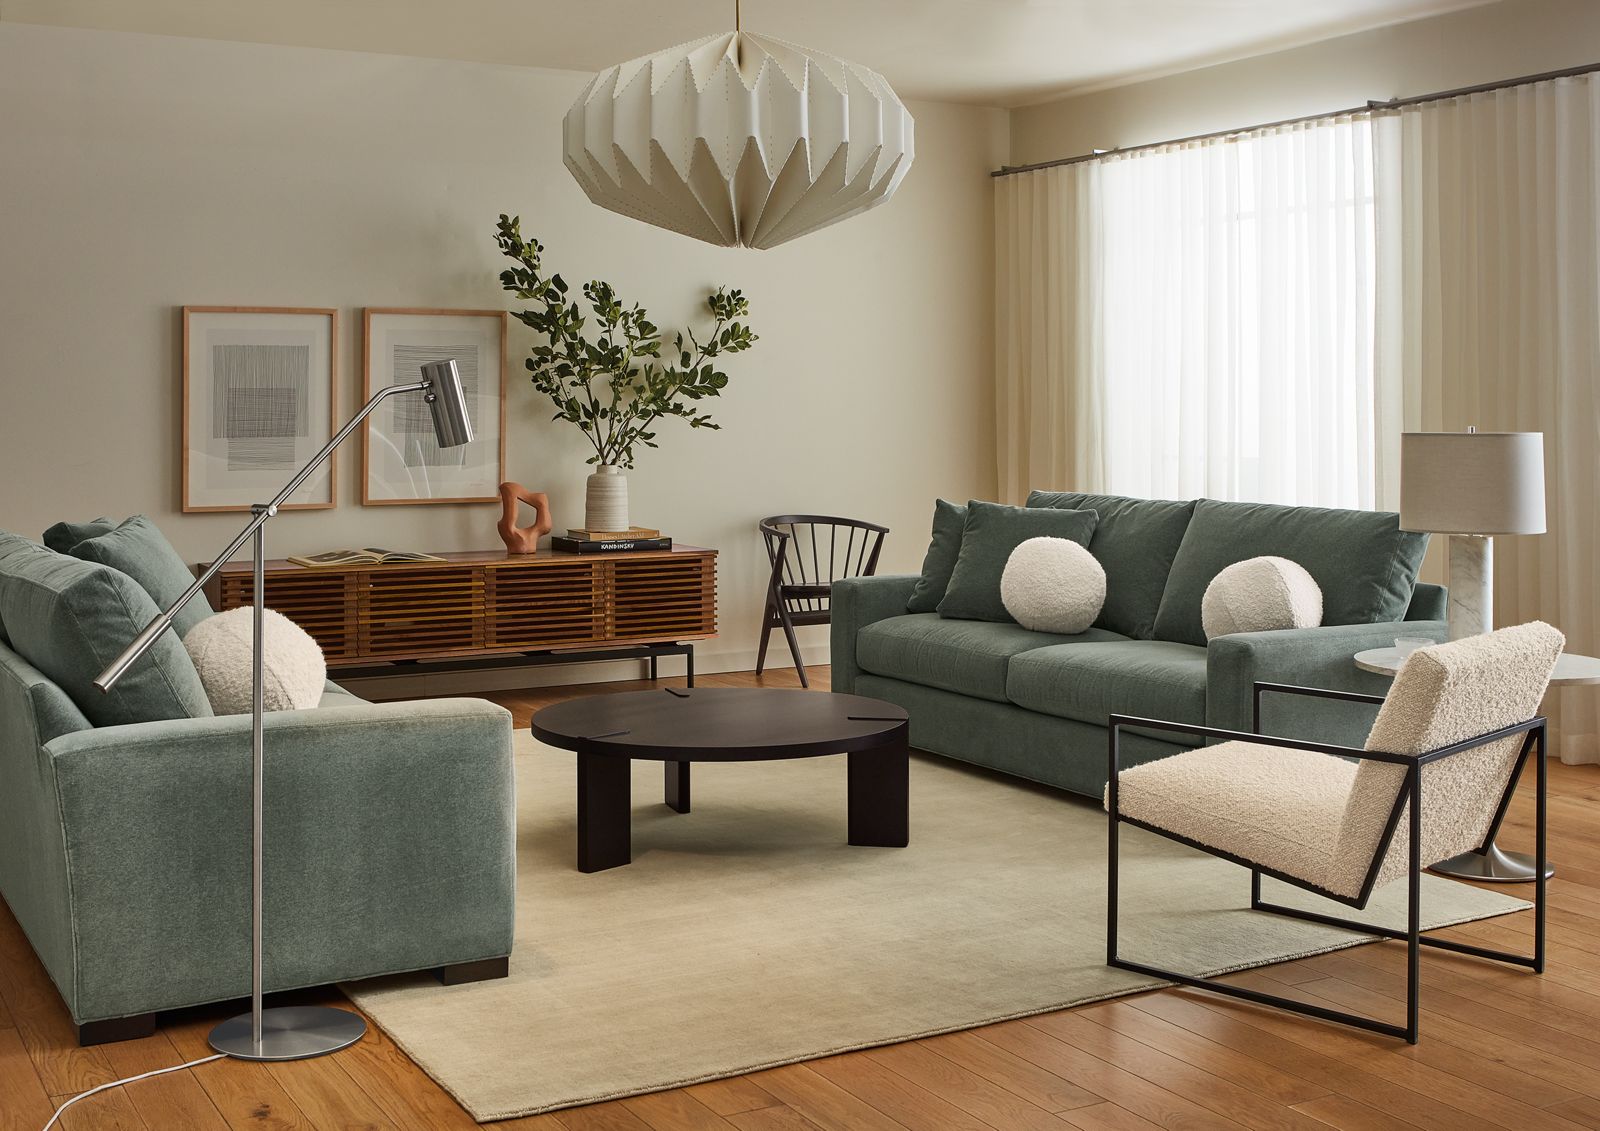 Living room setting of Coda Floor Lamp in Stainless steel, two Metro 88-inch sofas, Novato chair, Hanover coffee table in charcoal and Luco rug in silver.